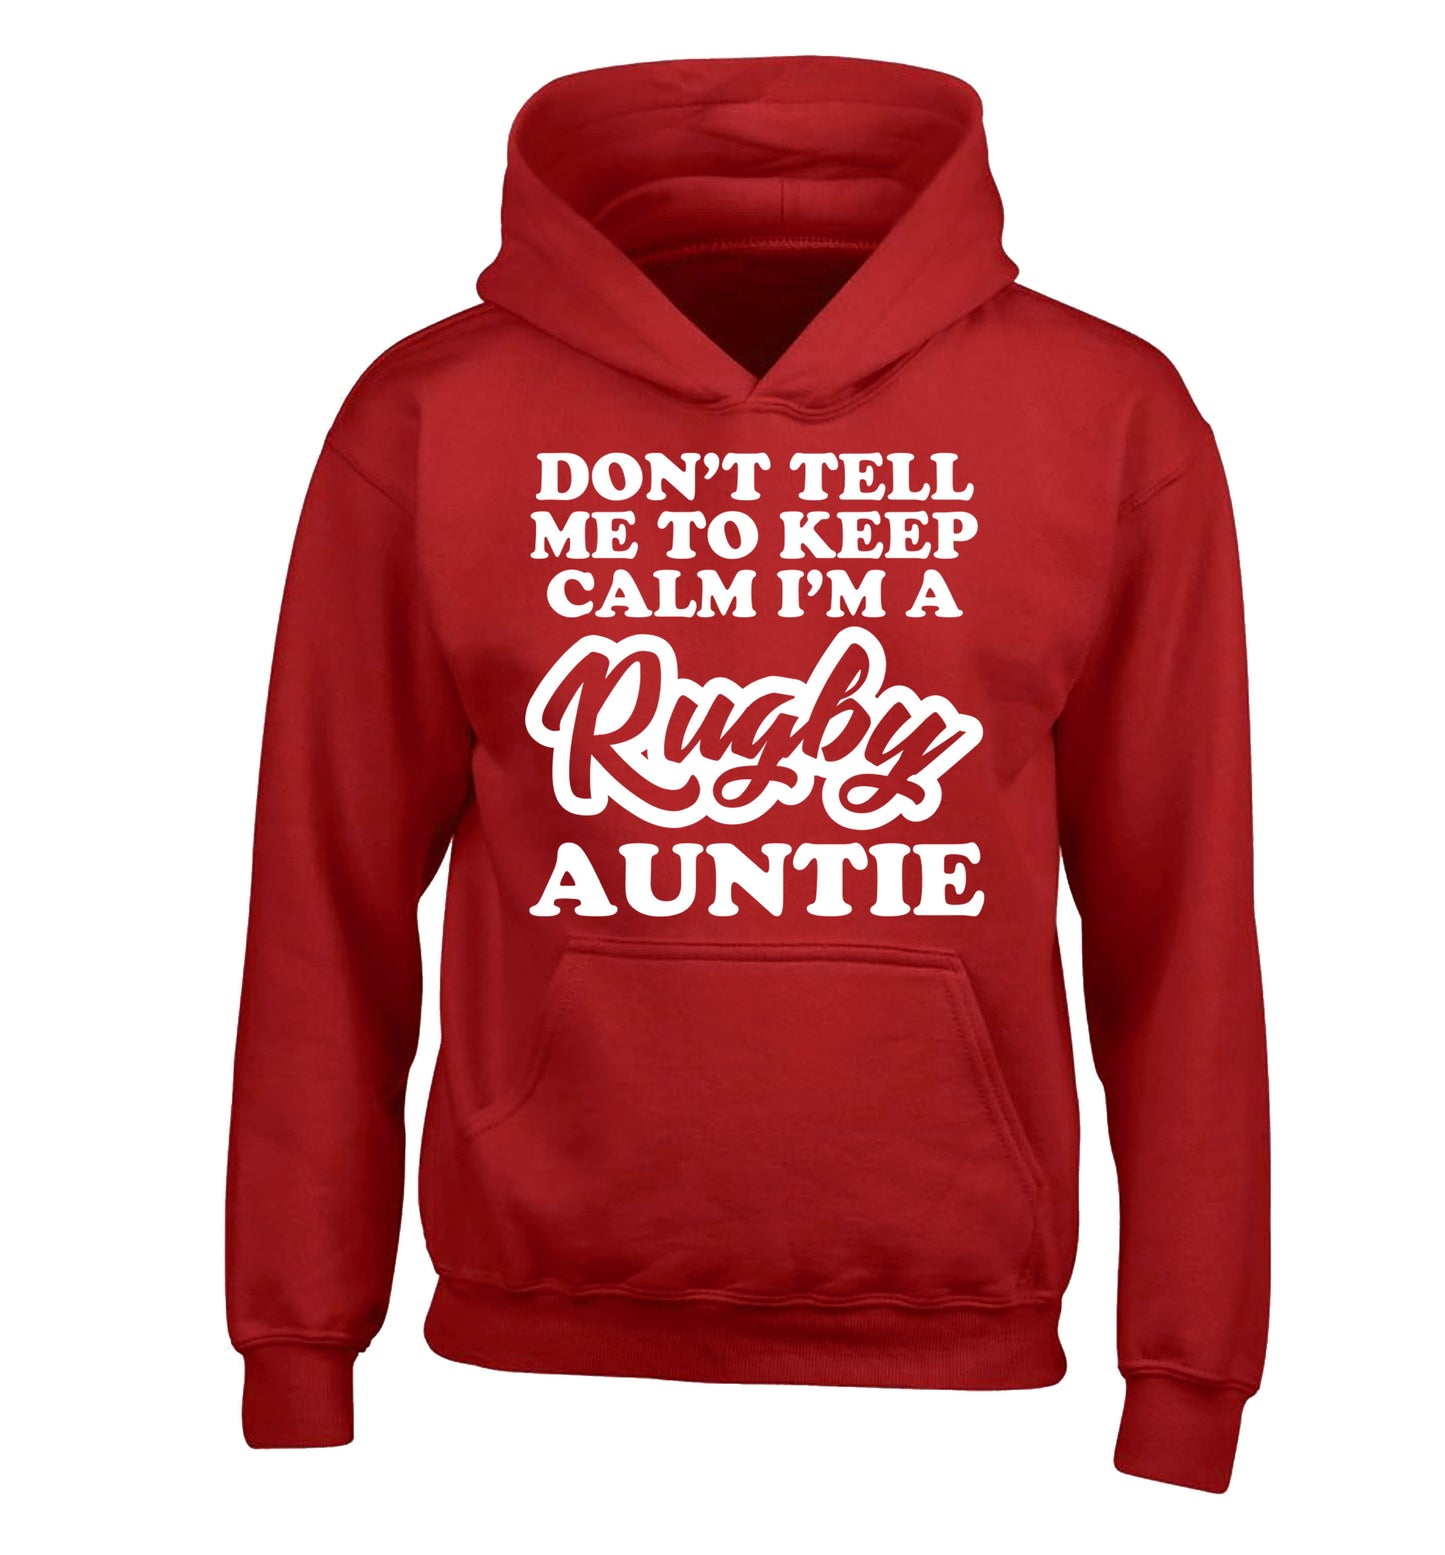 Don't tell me keep calm I'm a rugby auntie children's red hoodie 12-13 Years